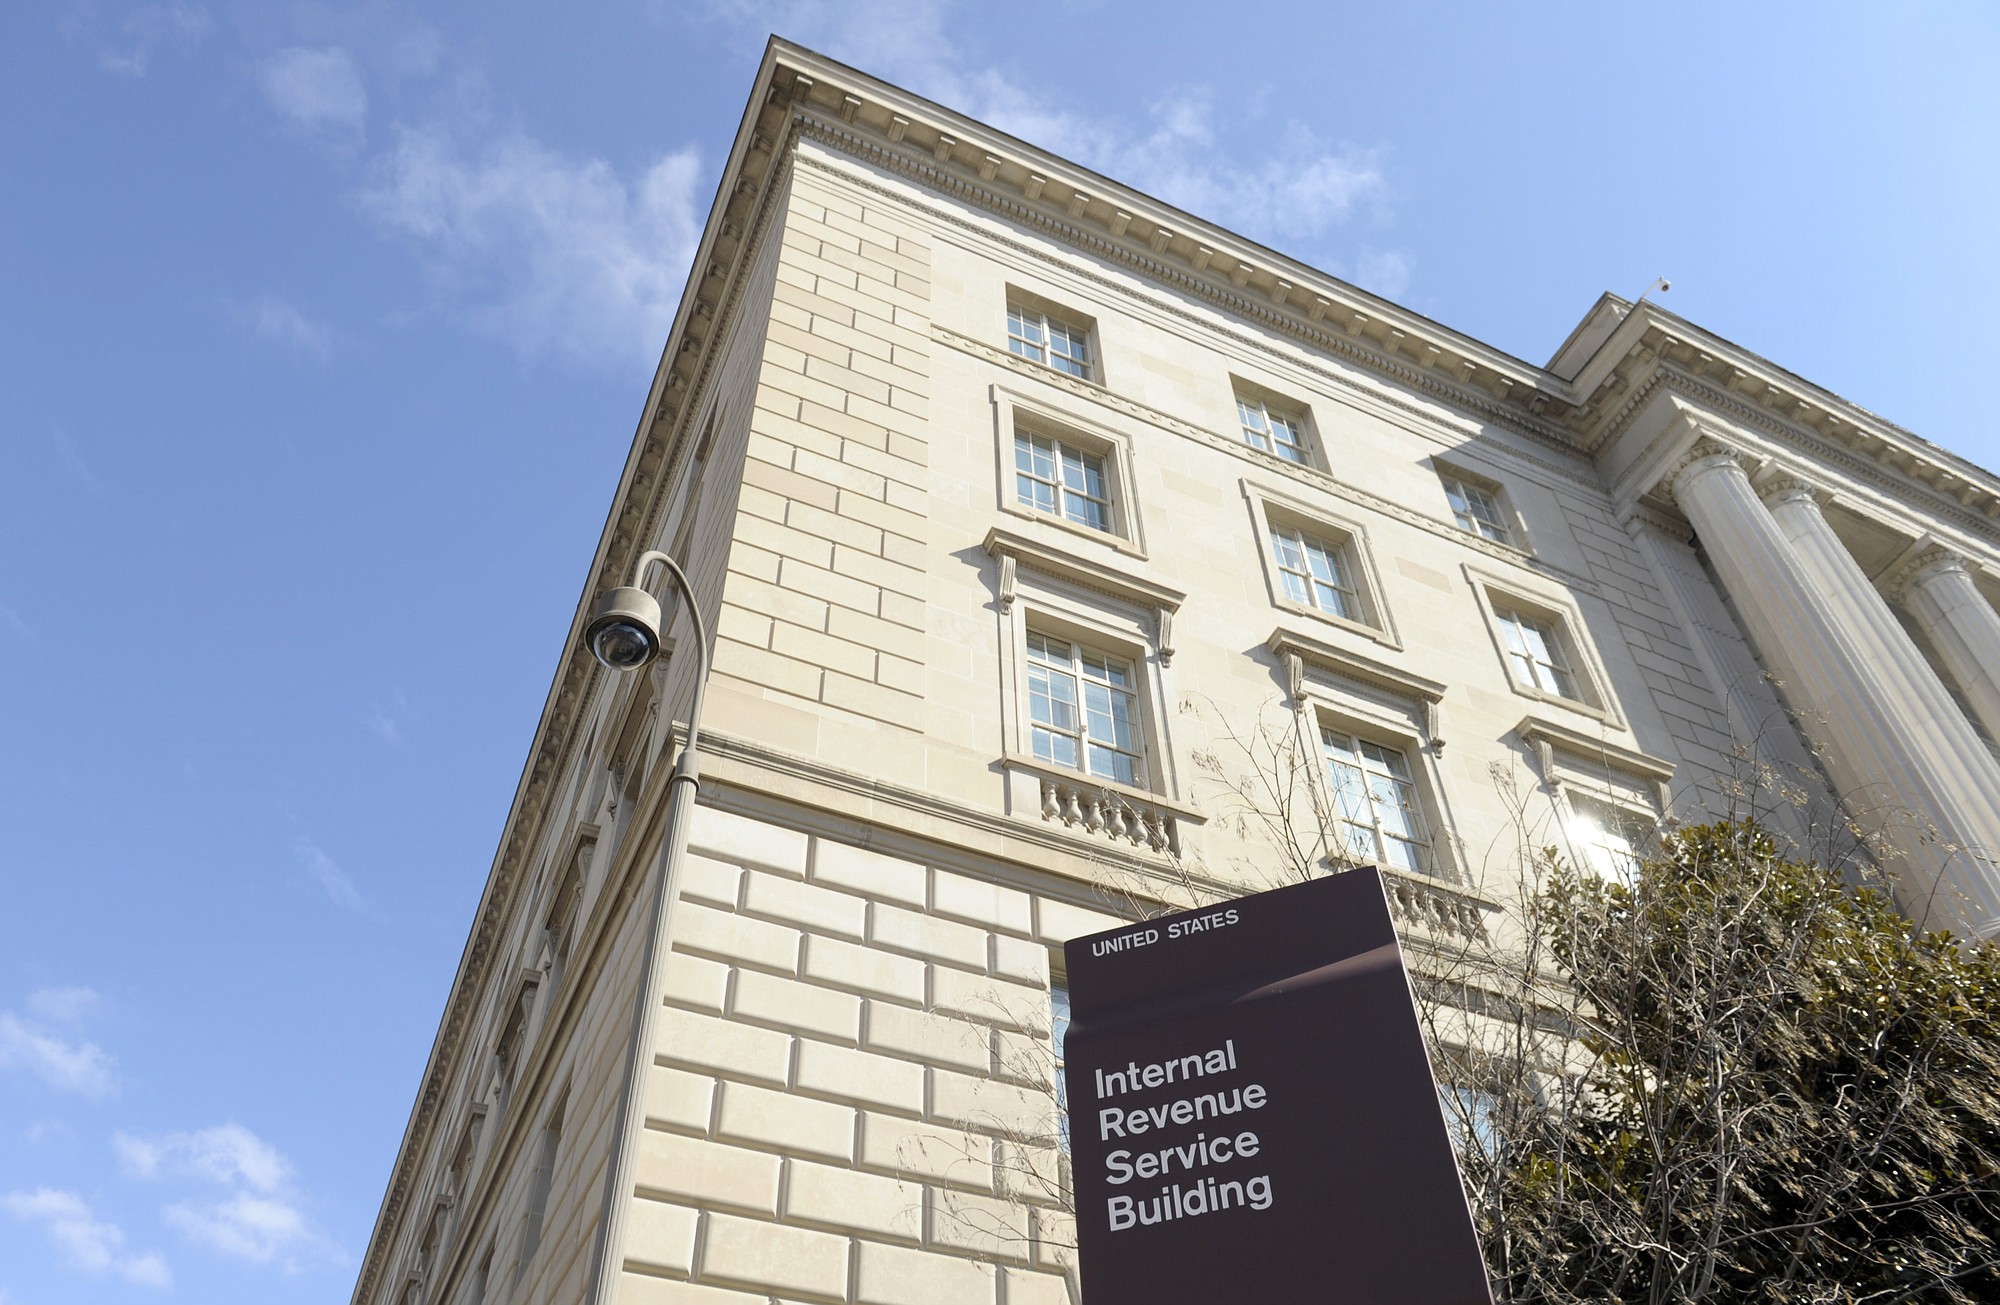 The exterior of the Internal Revenue Service building in Washington. Fake IRS agents have targeted more than 366,000 people with harassing phone calls demanding payments and threatening jail as part of a huge nationwide tax scam that has cost taxpayers $15.5 million.